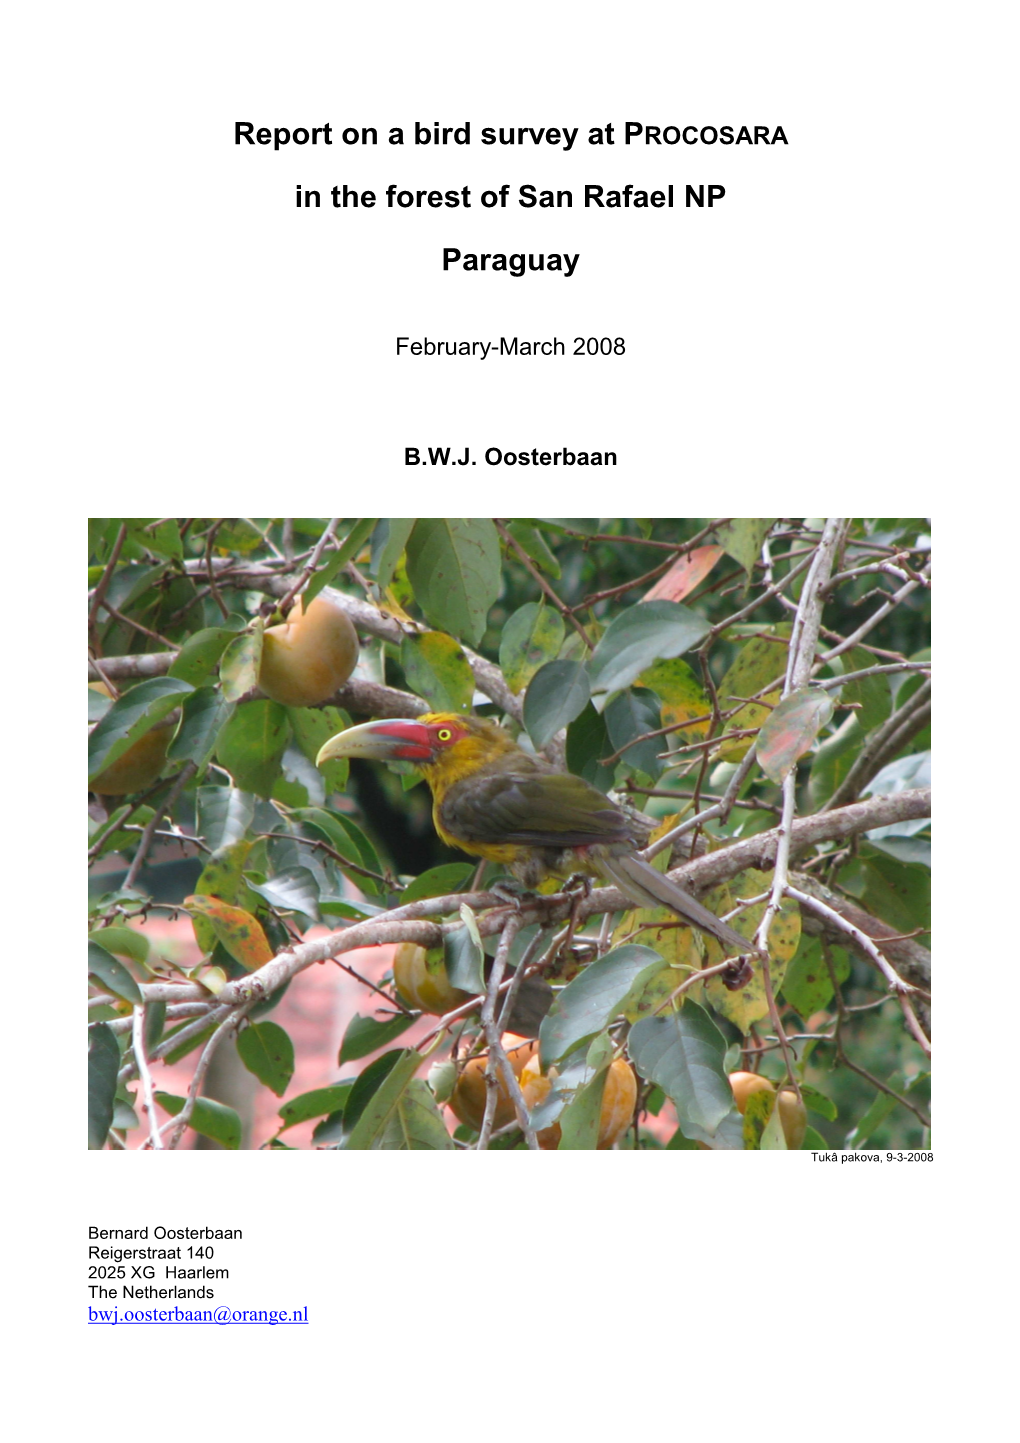 Report on a Bird Survey at PROCOSARA in the Forest of San